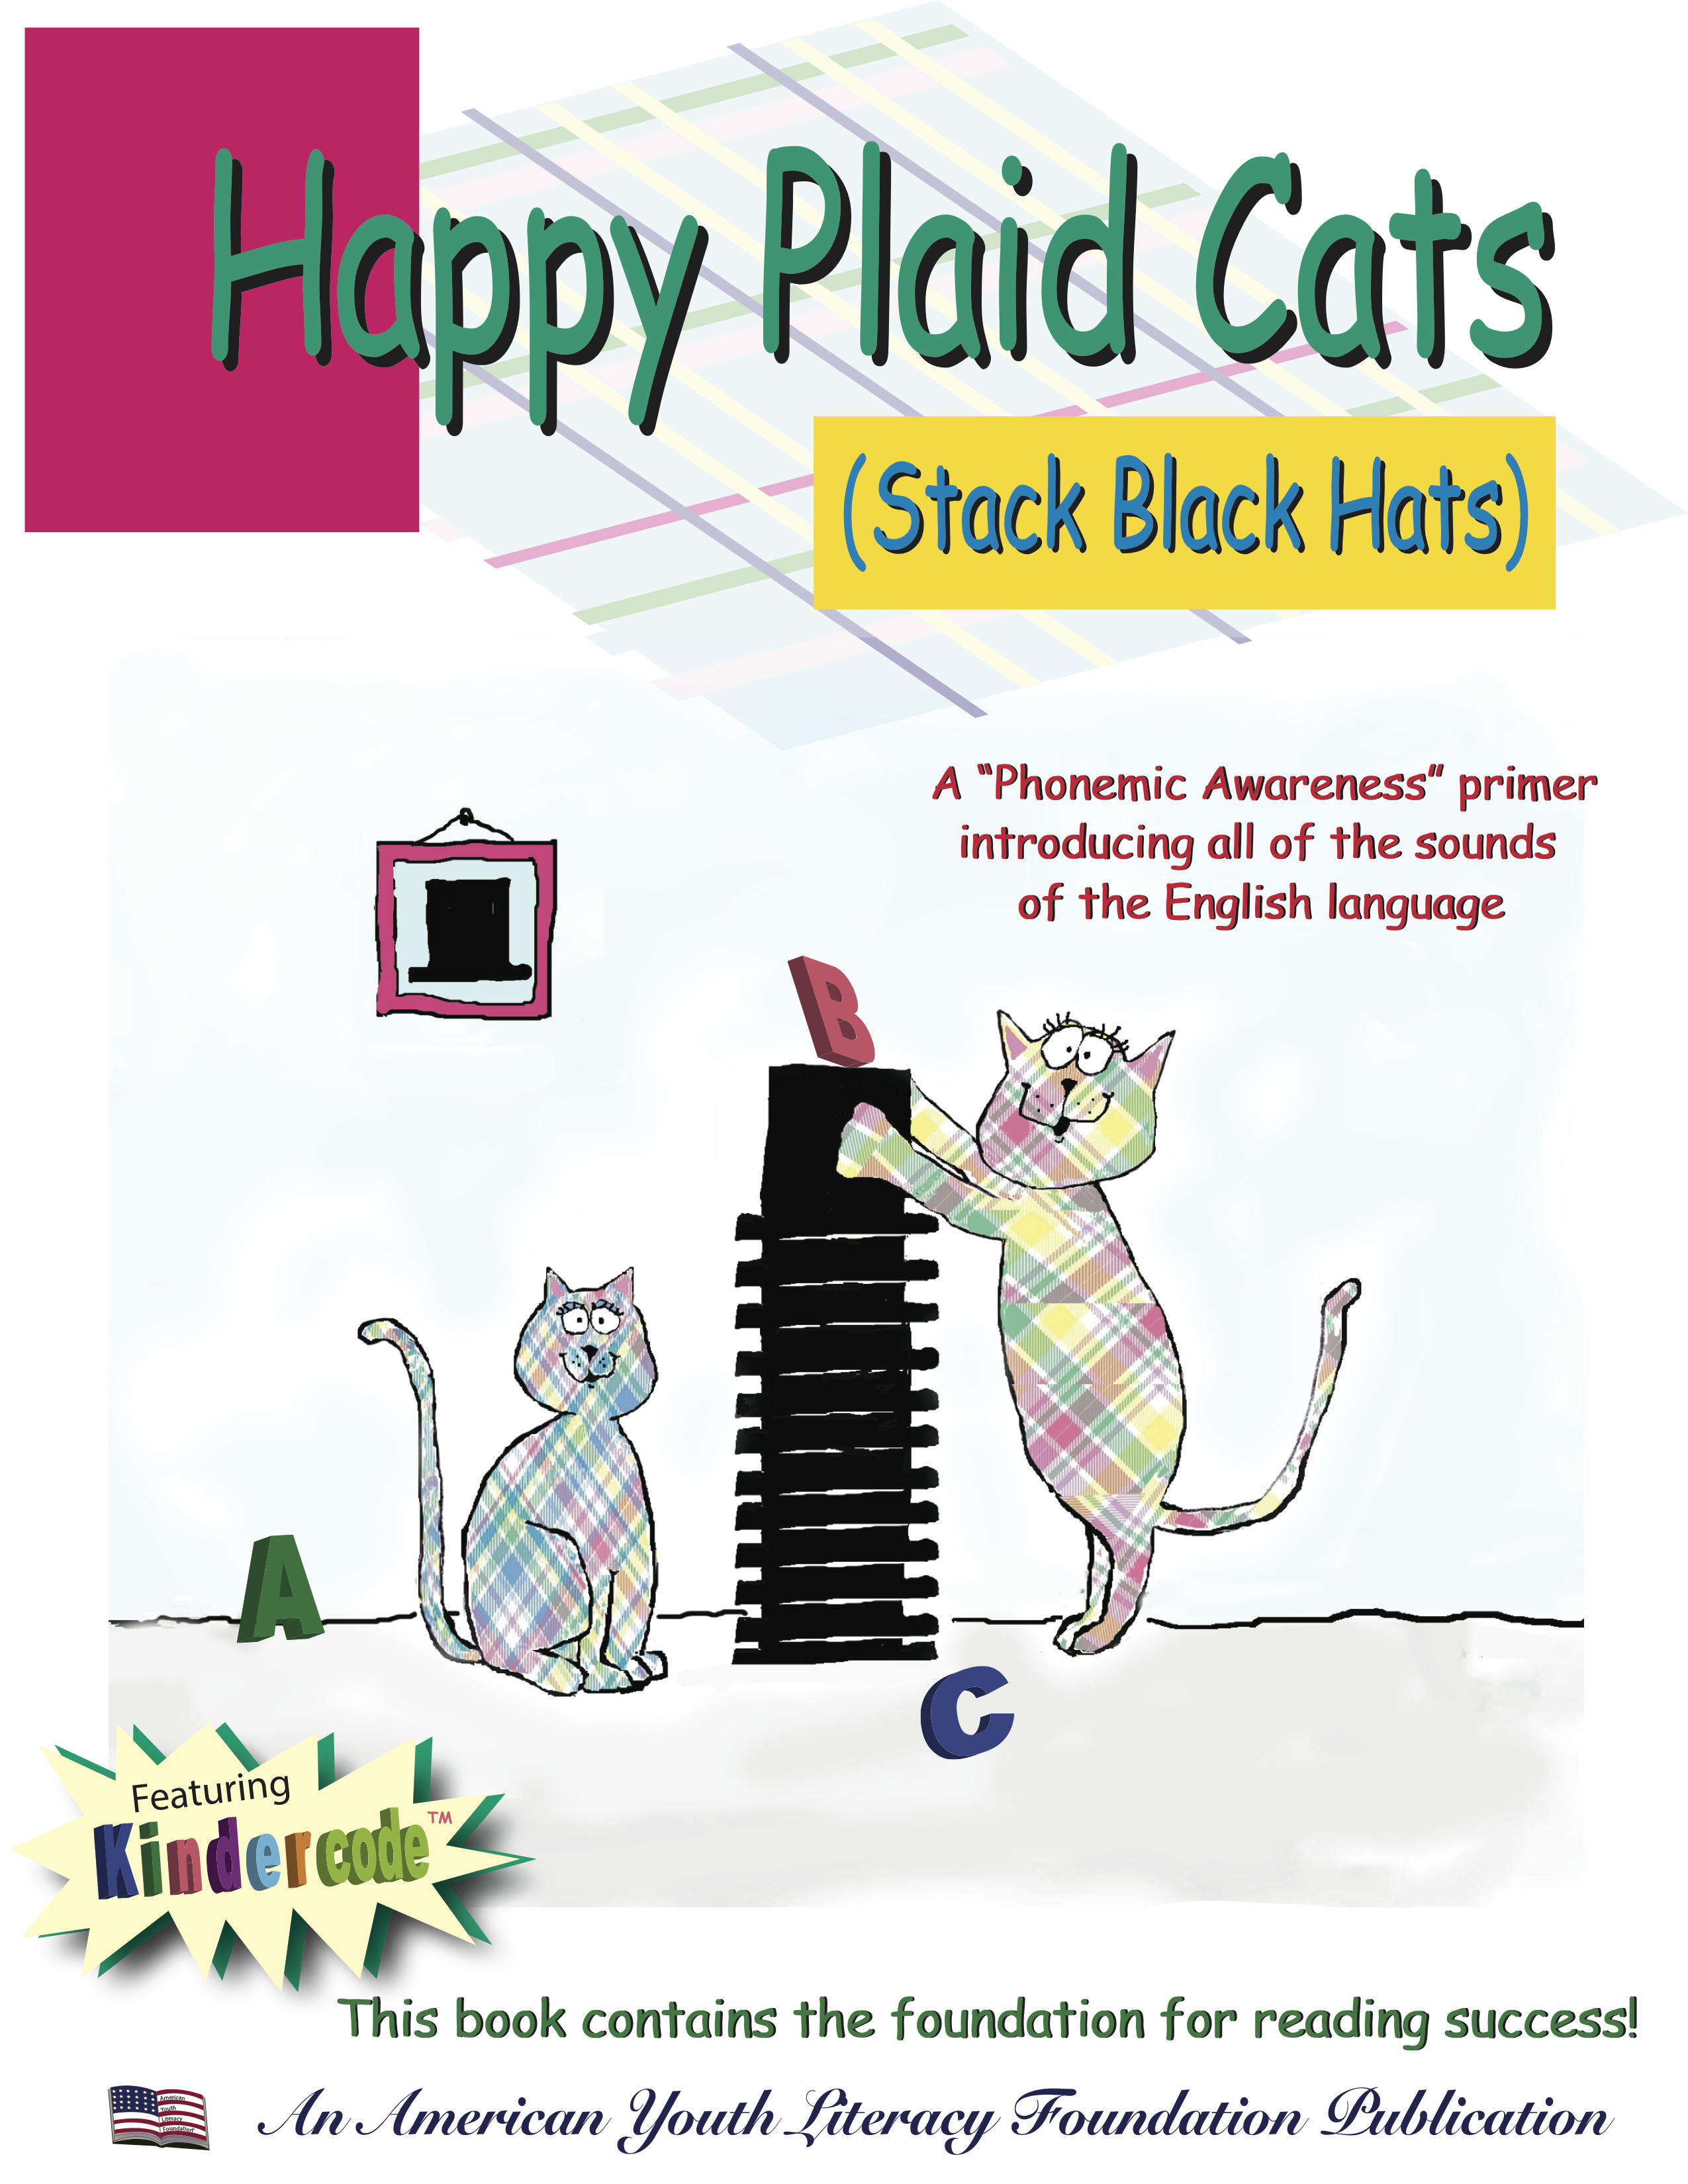 Plaid Cats Cover 5-15